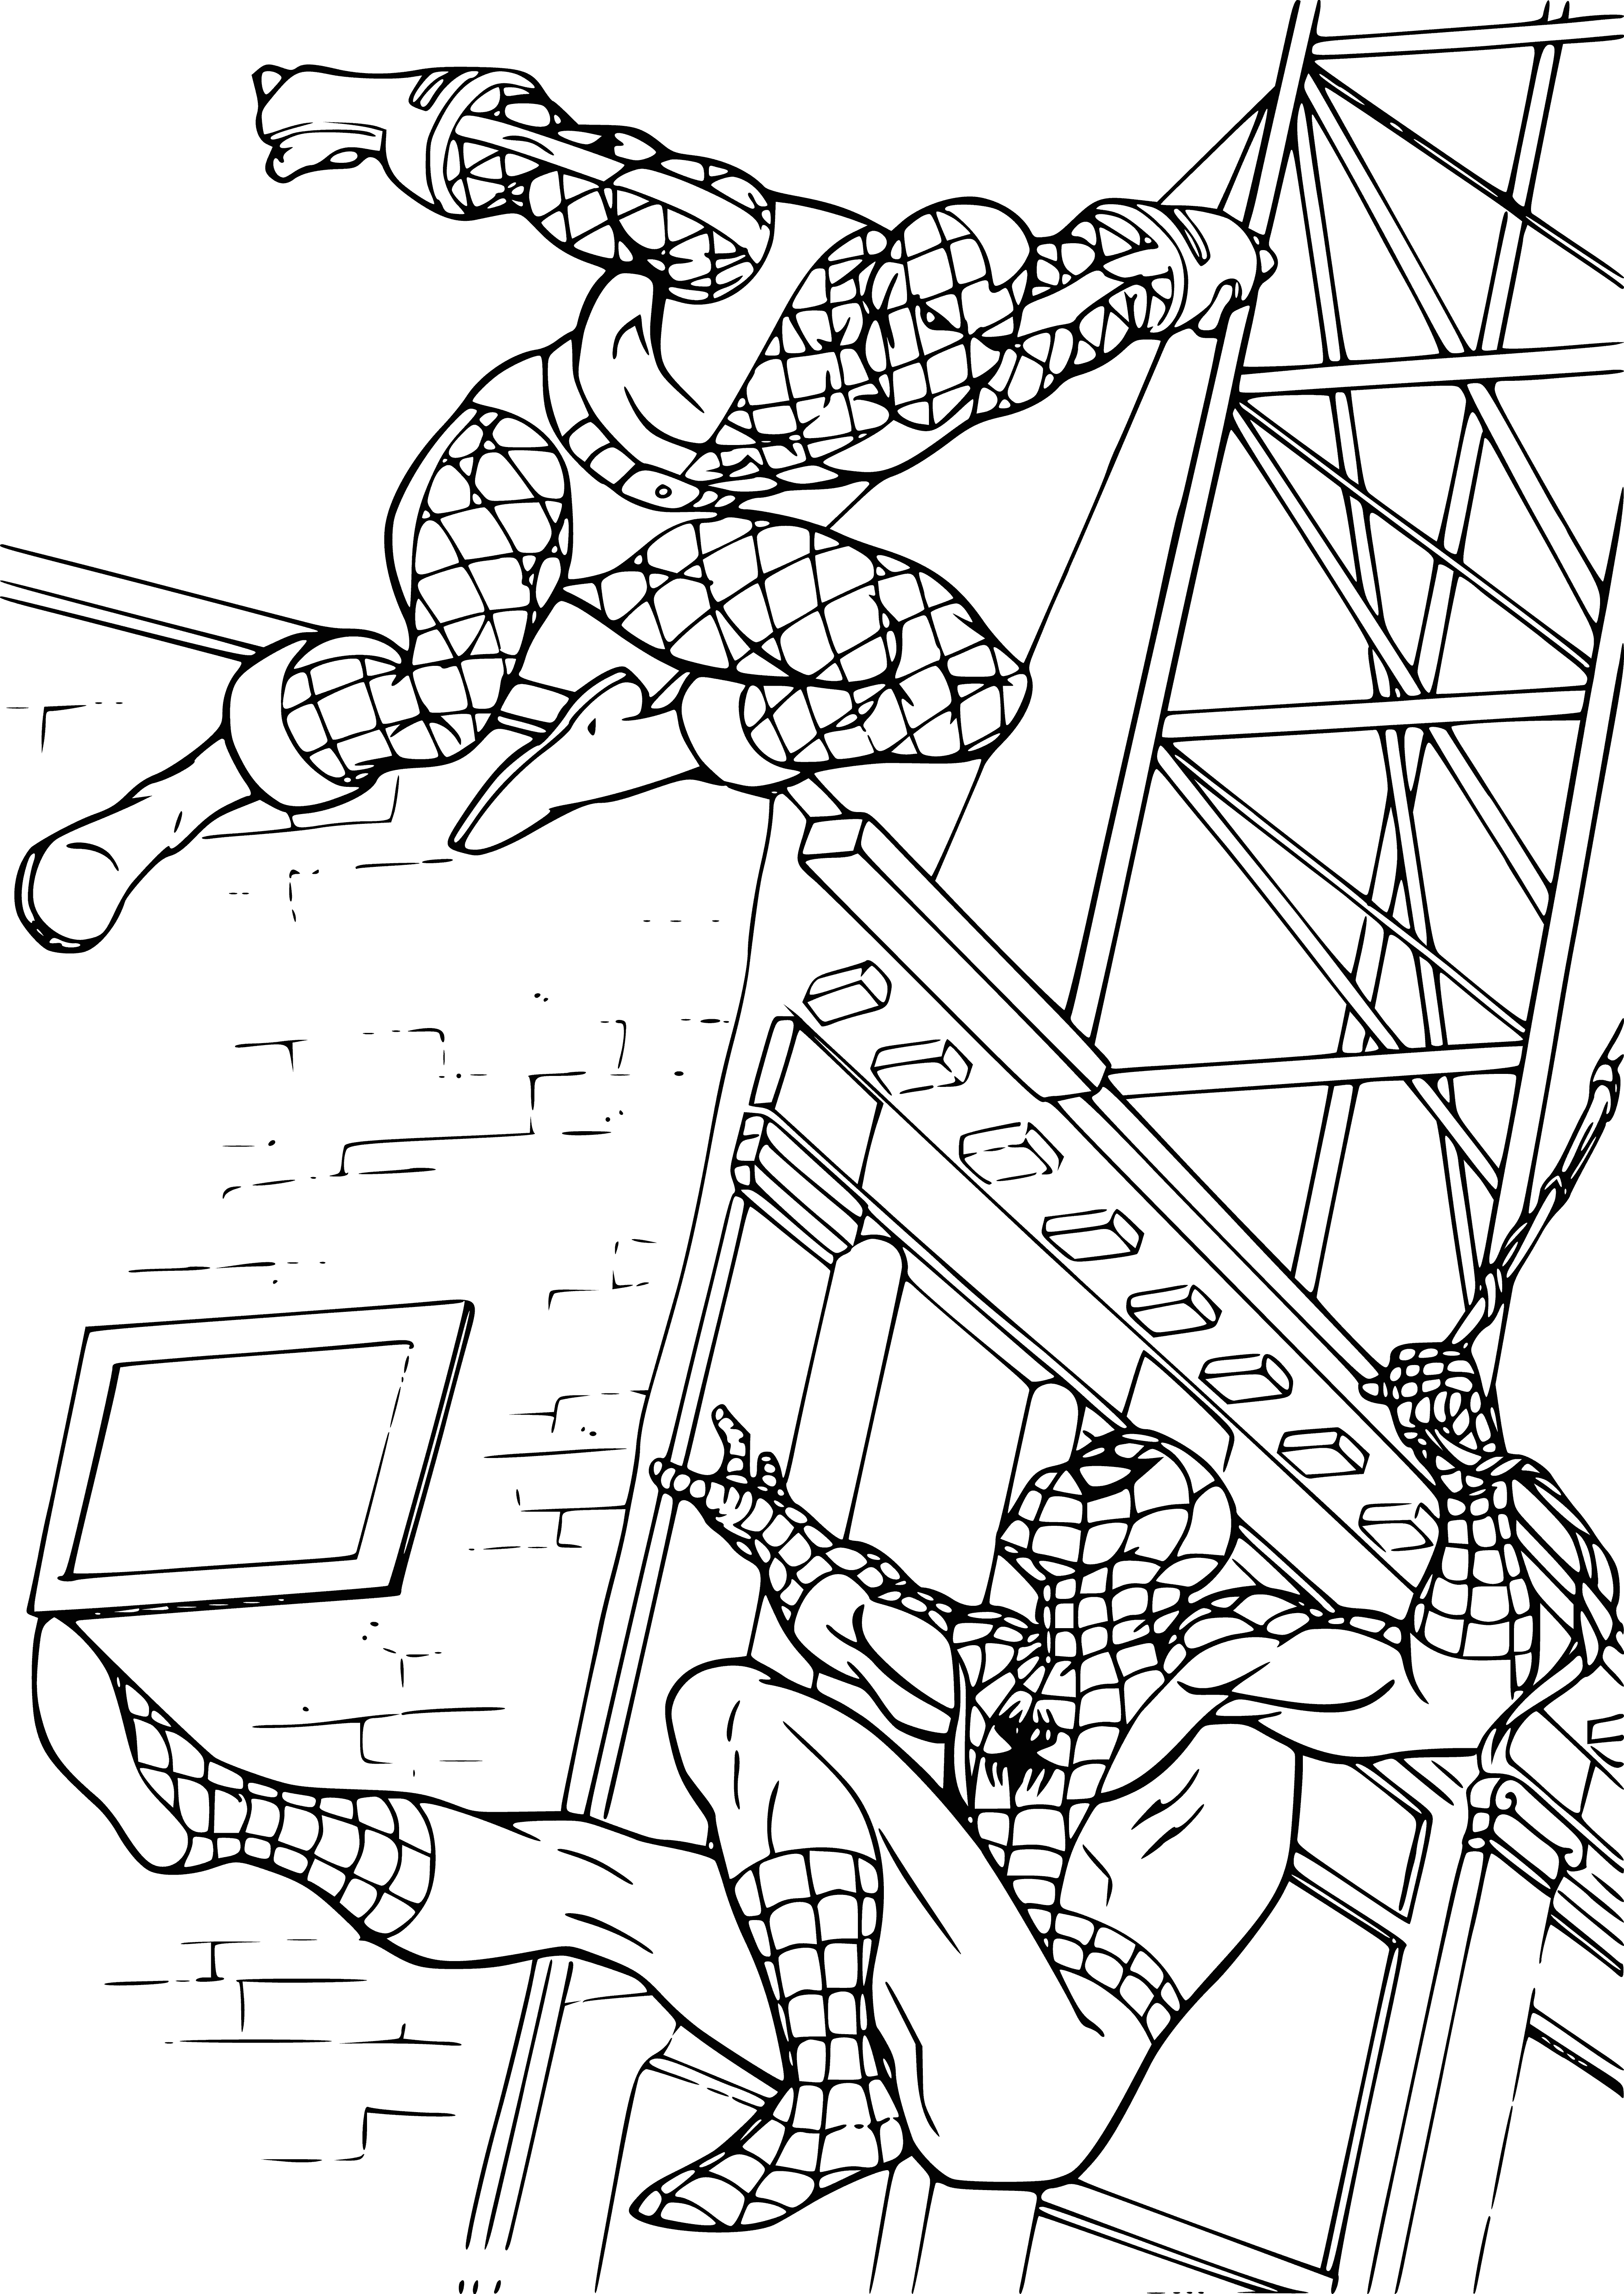 coloring page: Spiderman in red/blue suit, black spider, red mask & white eyes standing on building, enemy large spider in background.